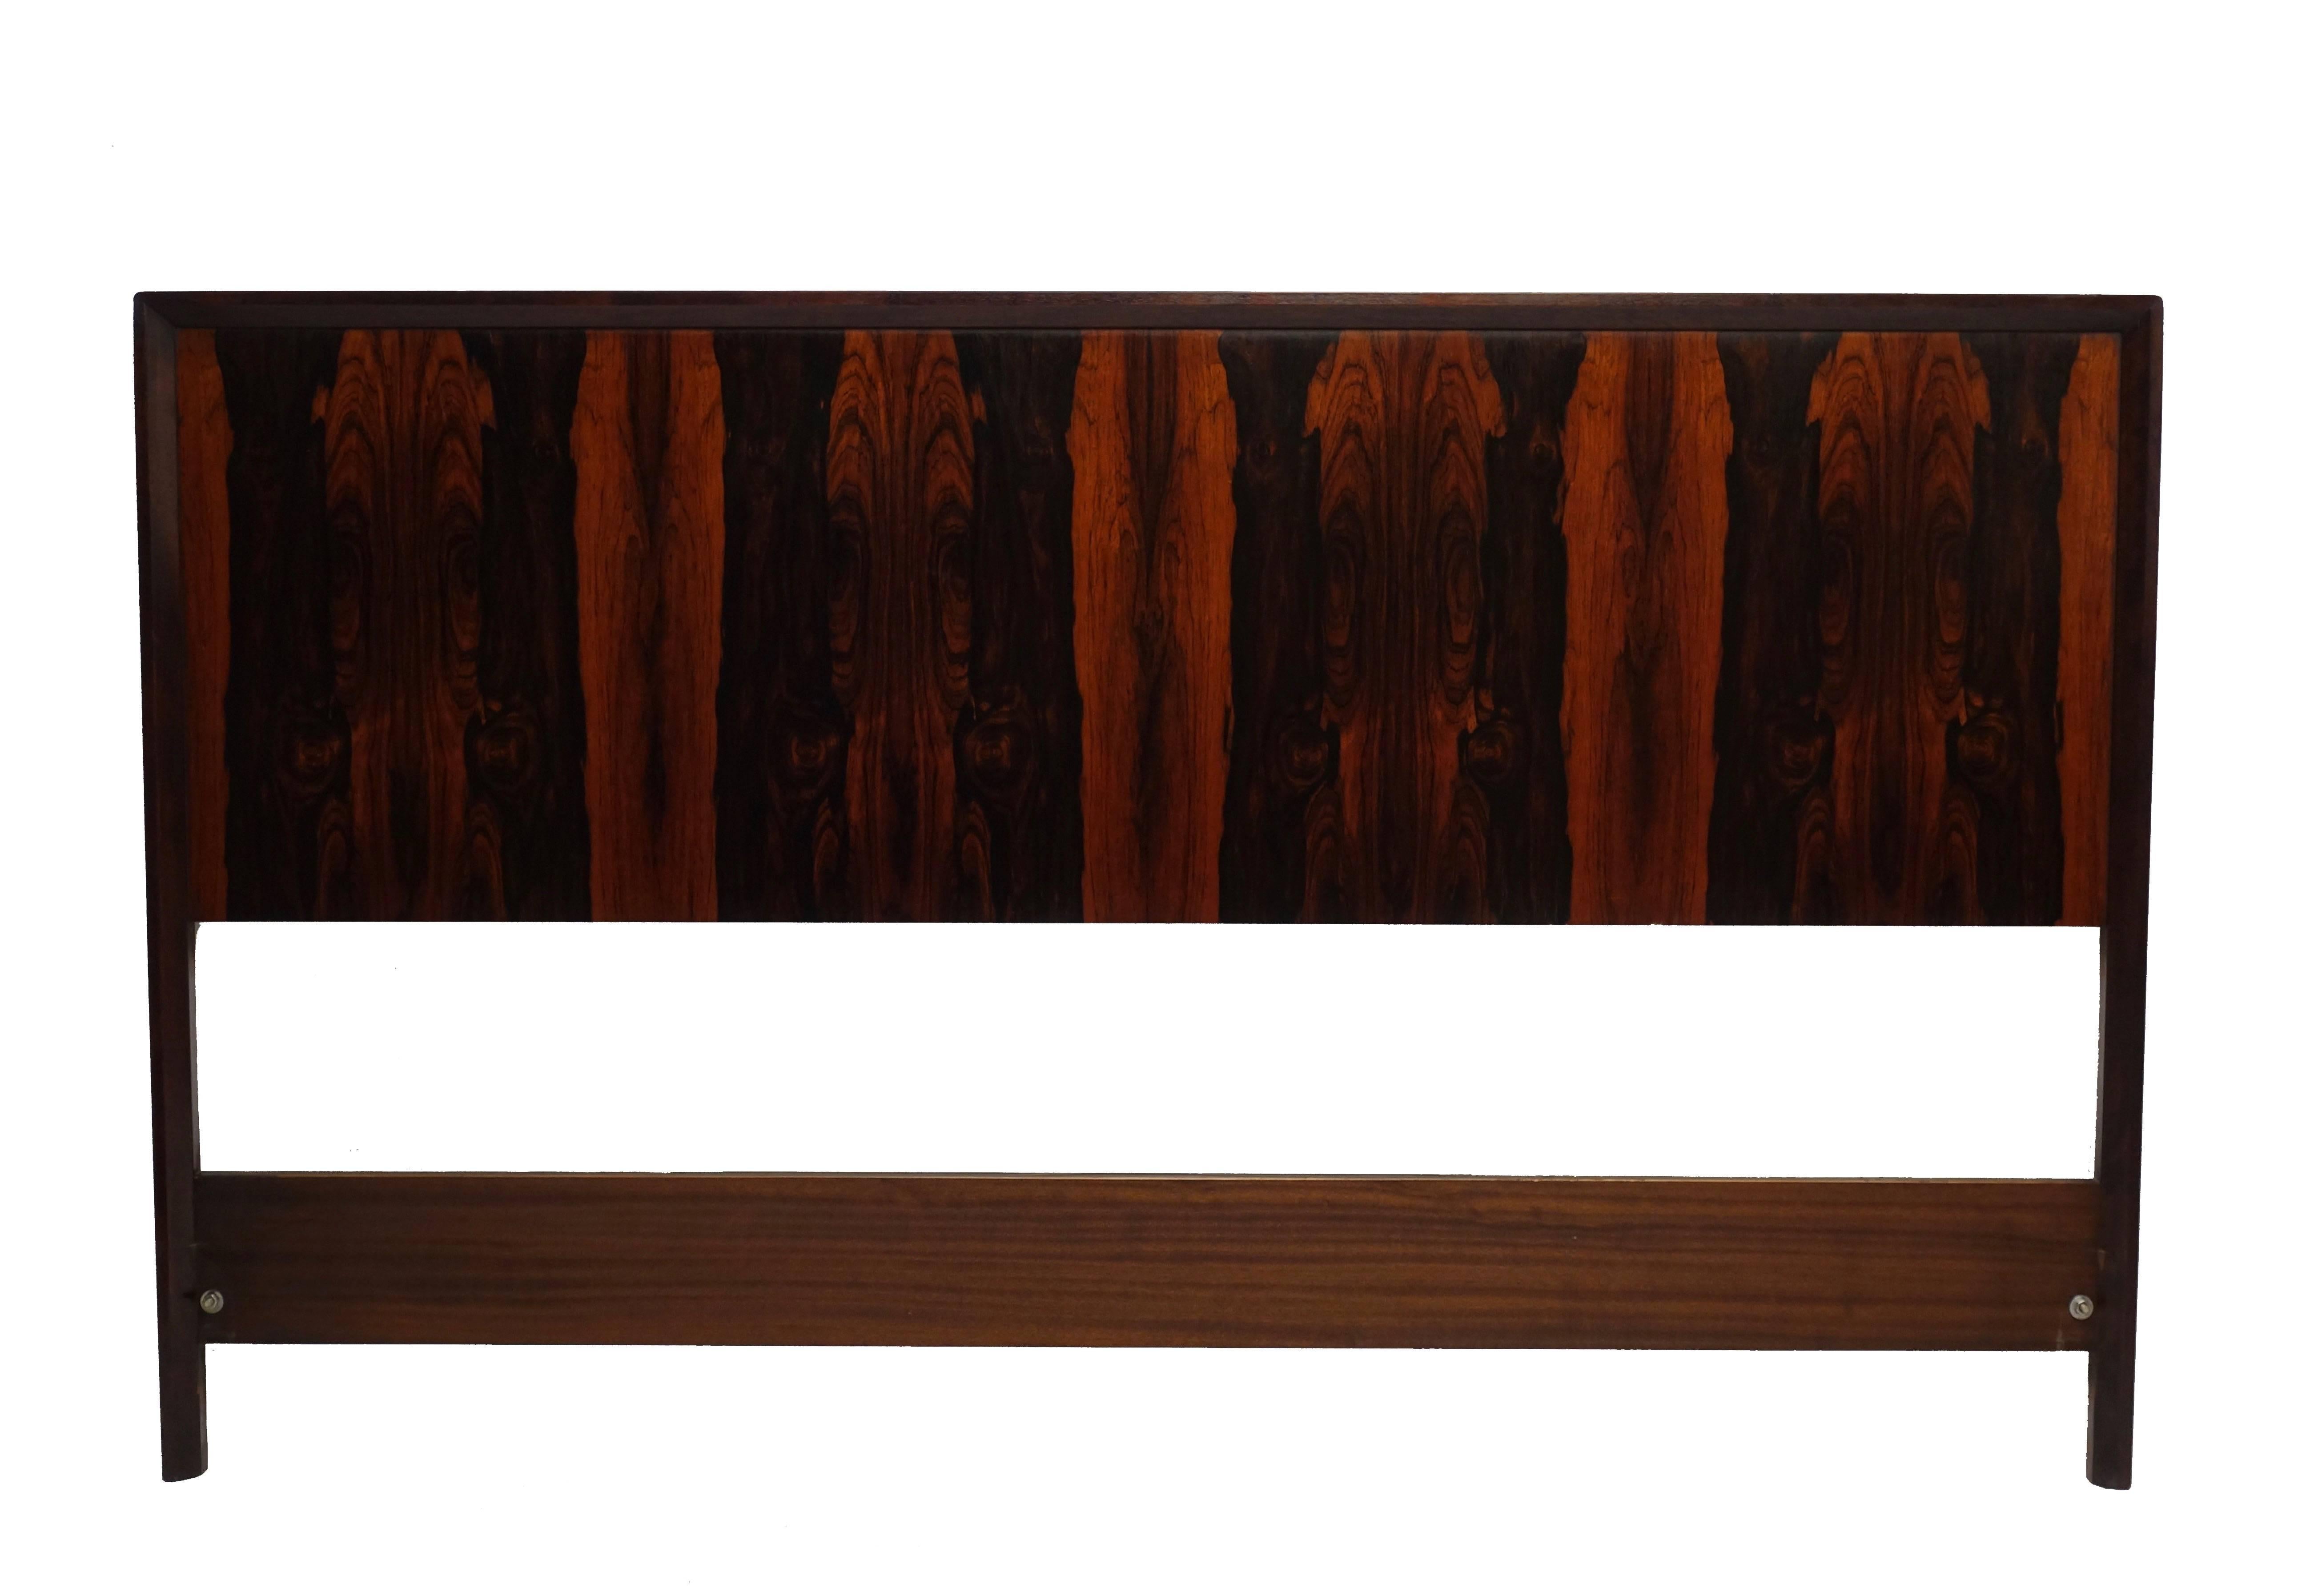 A striking bookmatched rosewood queen-size headboard framed in walnut. Original label on the reverse reads Westnofa Furniture, made in Norway, midcentury, Norway.